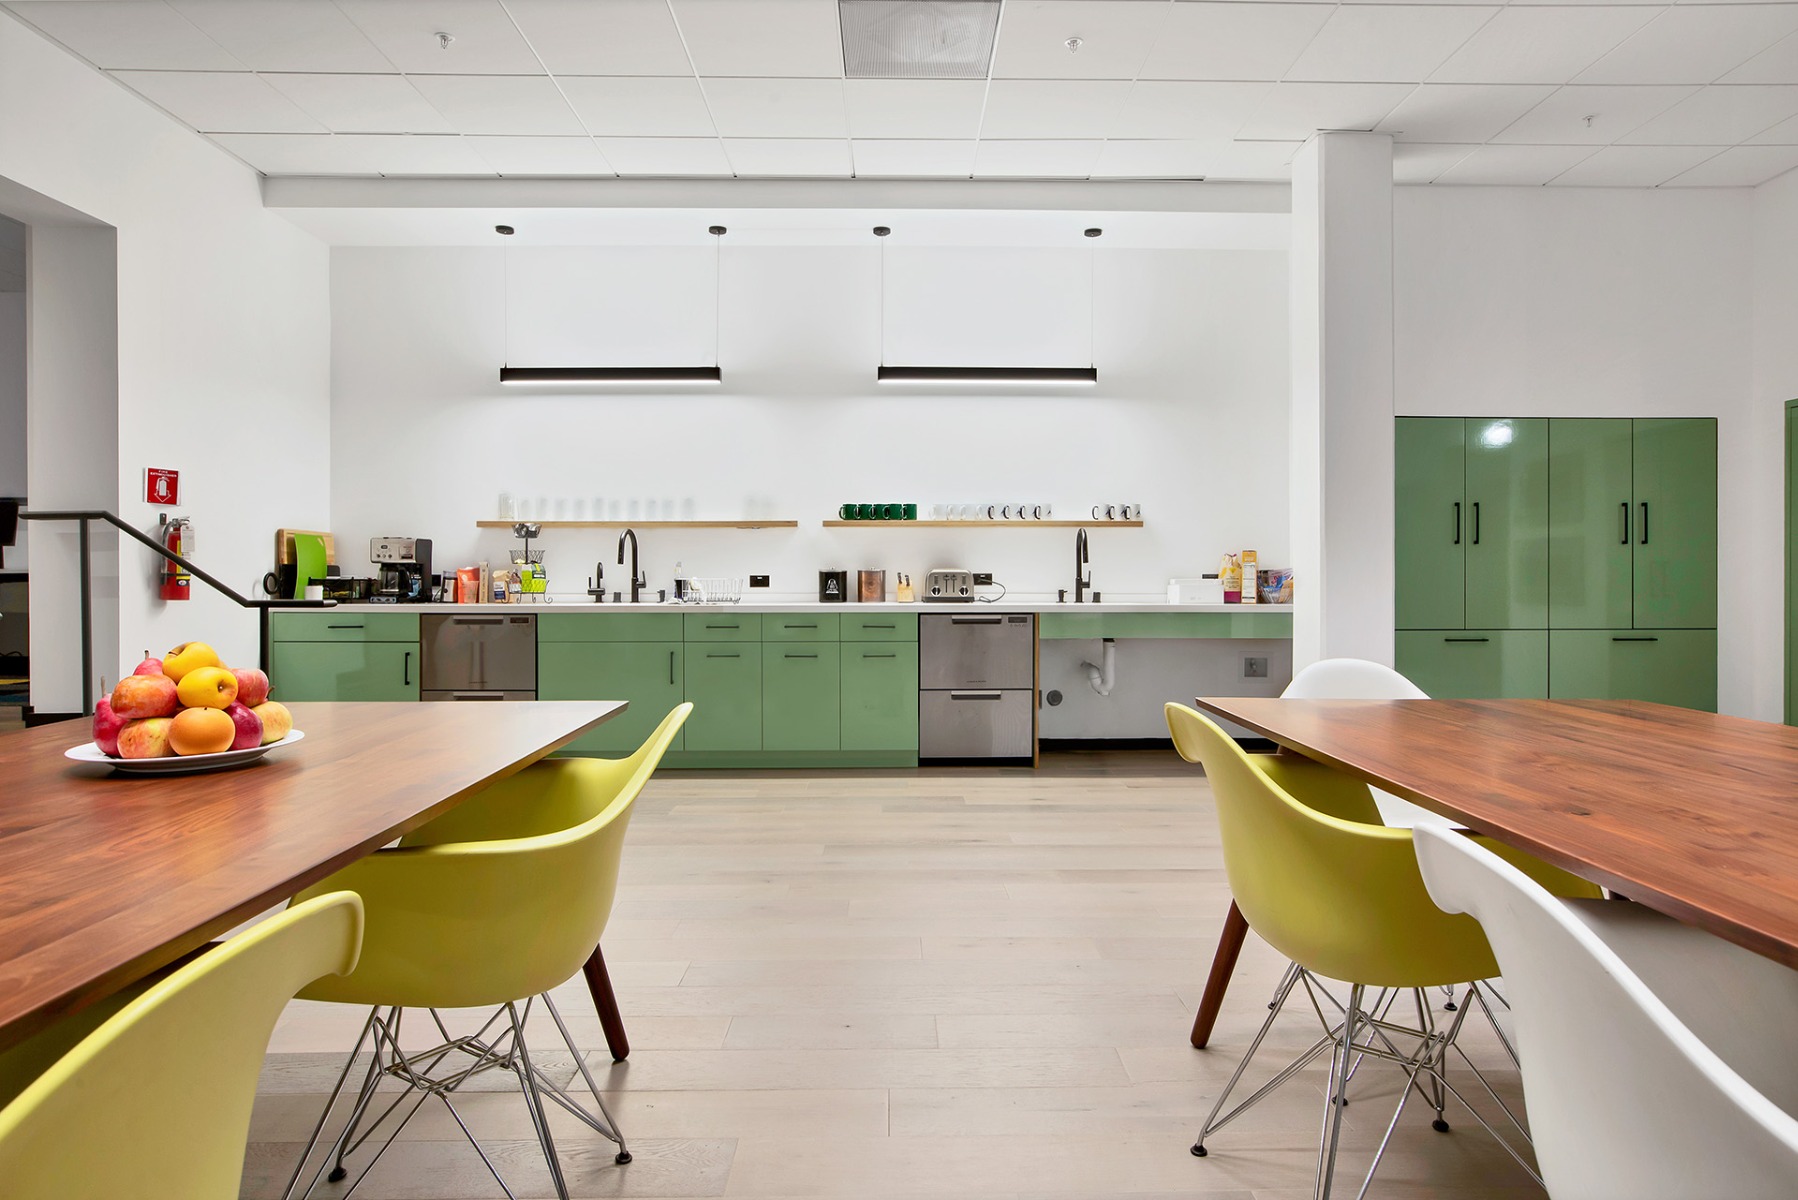 Tunable-white linear suspension light fixtures in common spaces also allow occupants in spaces like kitchen areas to create a more relaxing environment